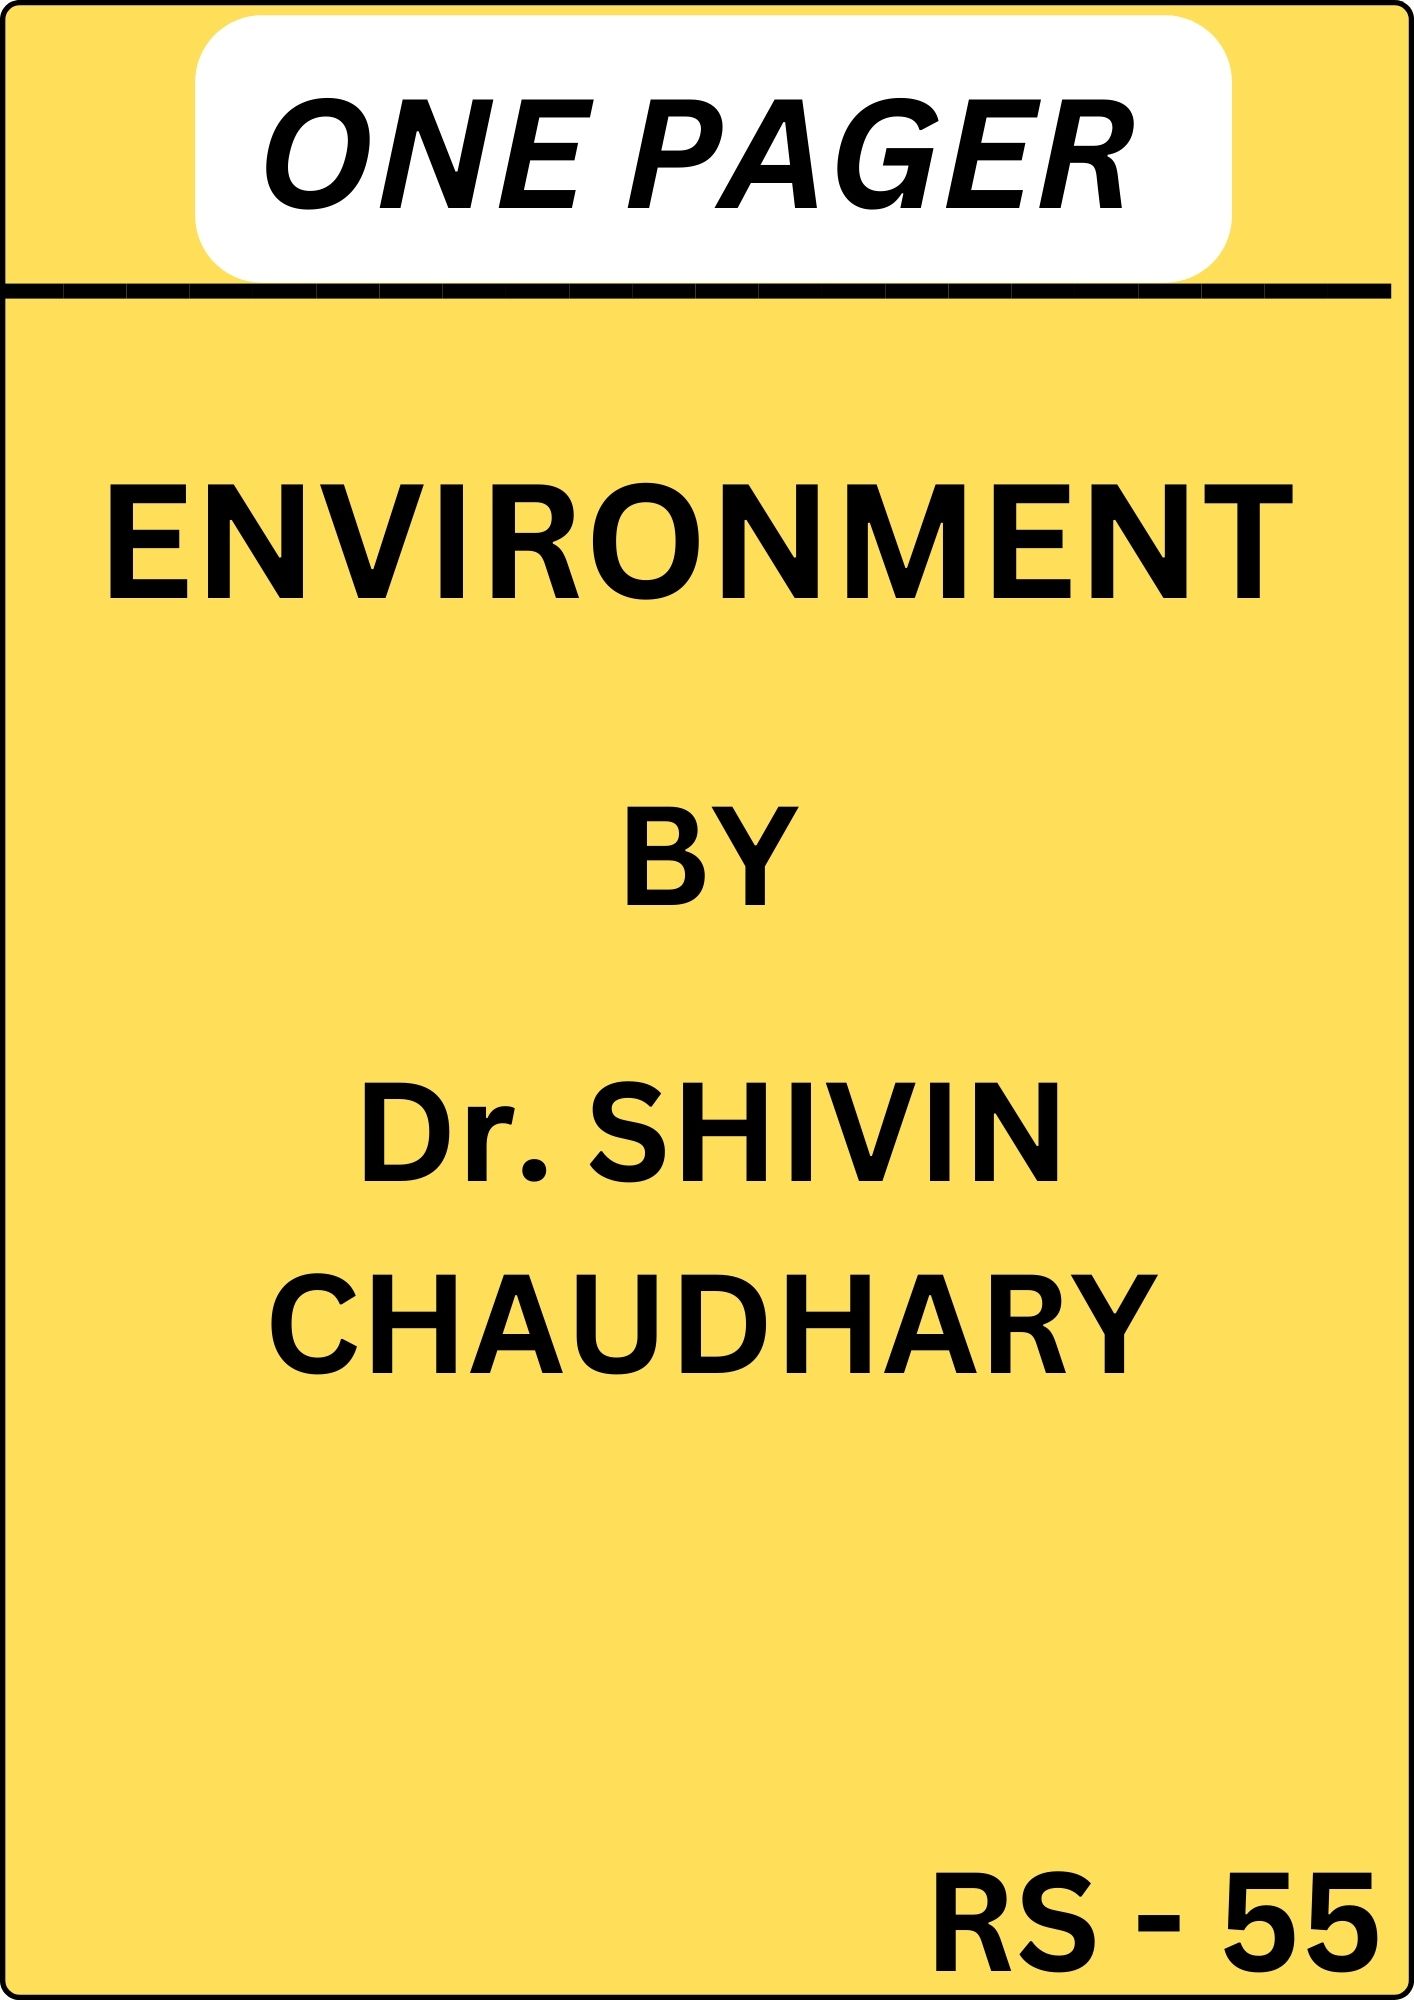 Manufacturer, Exporter, Importer, Supplier, Wholesaler, Retailer, Trader of ENVIRONMENT ONE PAGER BY Dr. SHIVIN CHAUDHARY in New Delhi, Delhi, India.